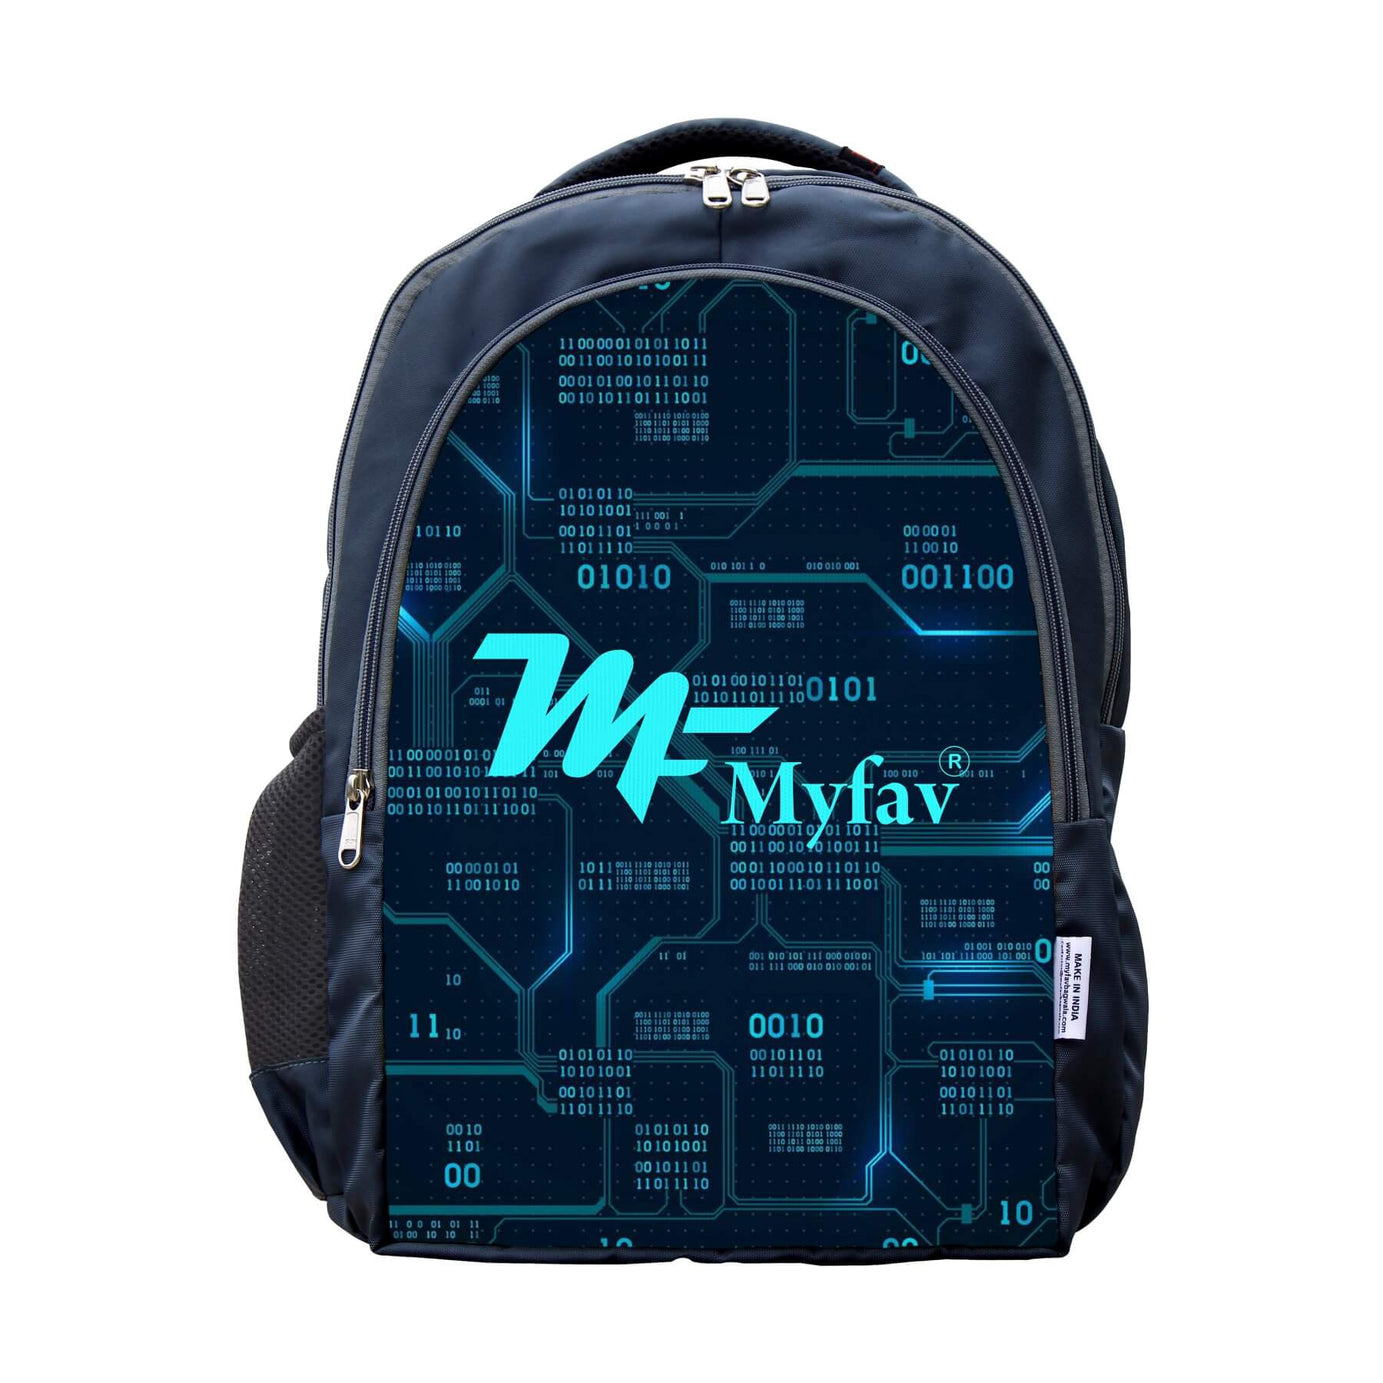 MY FAV Digital Print School College Backpack with Laptop Compartment 30 L Laptop Backpack